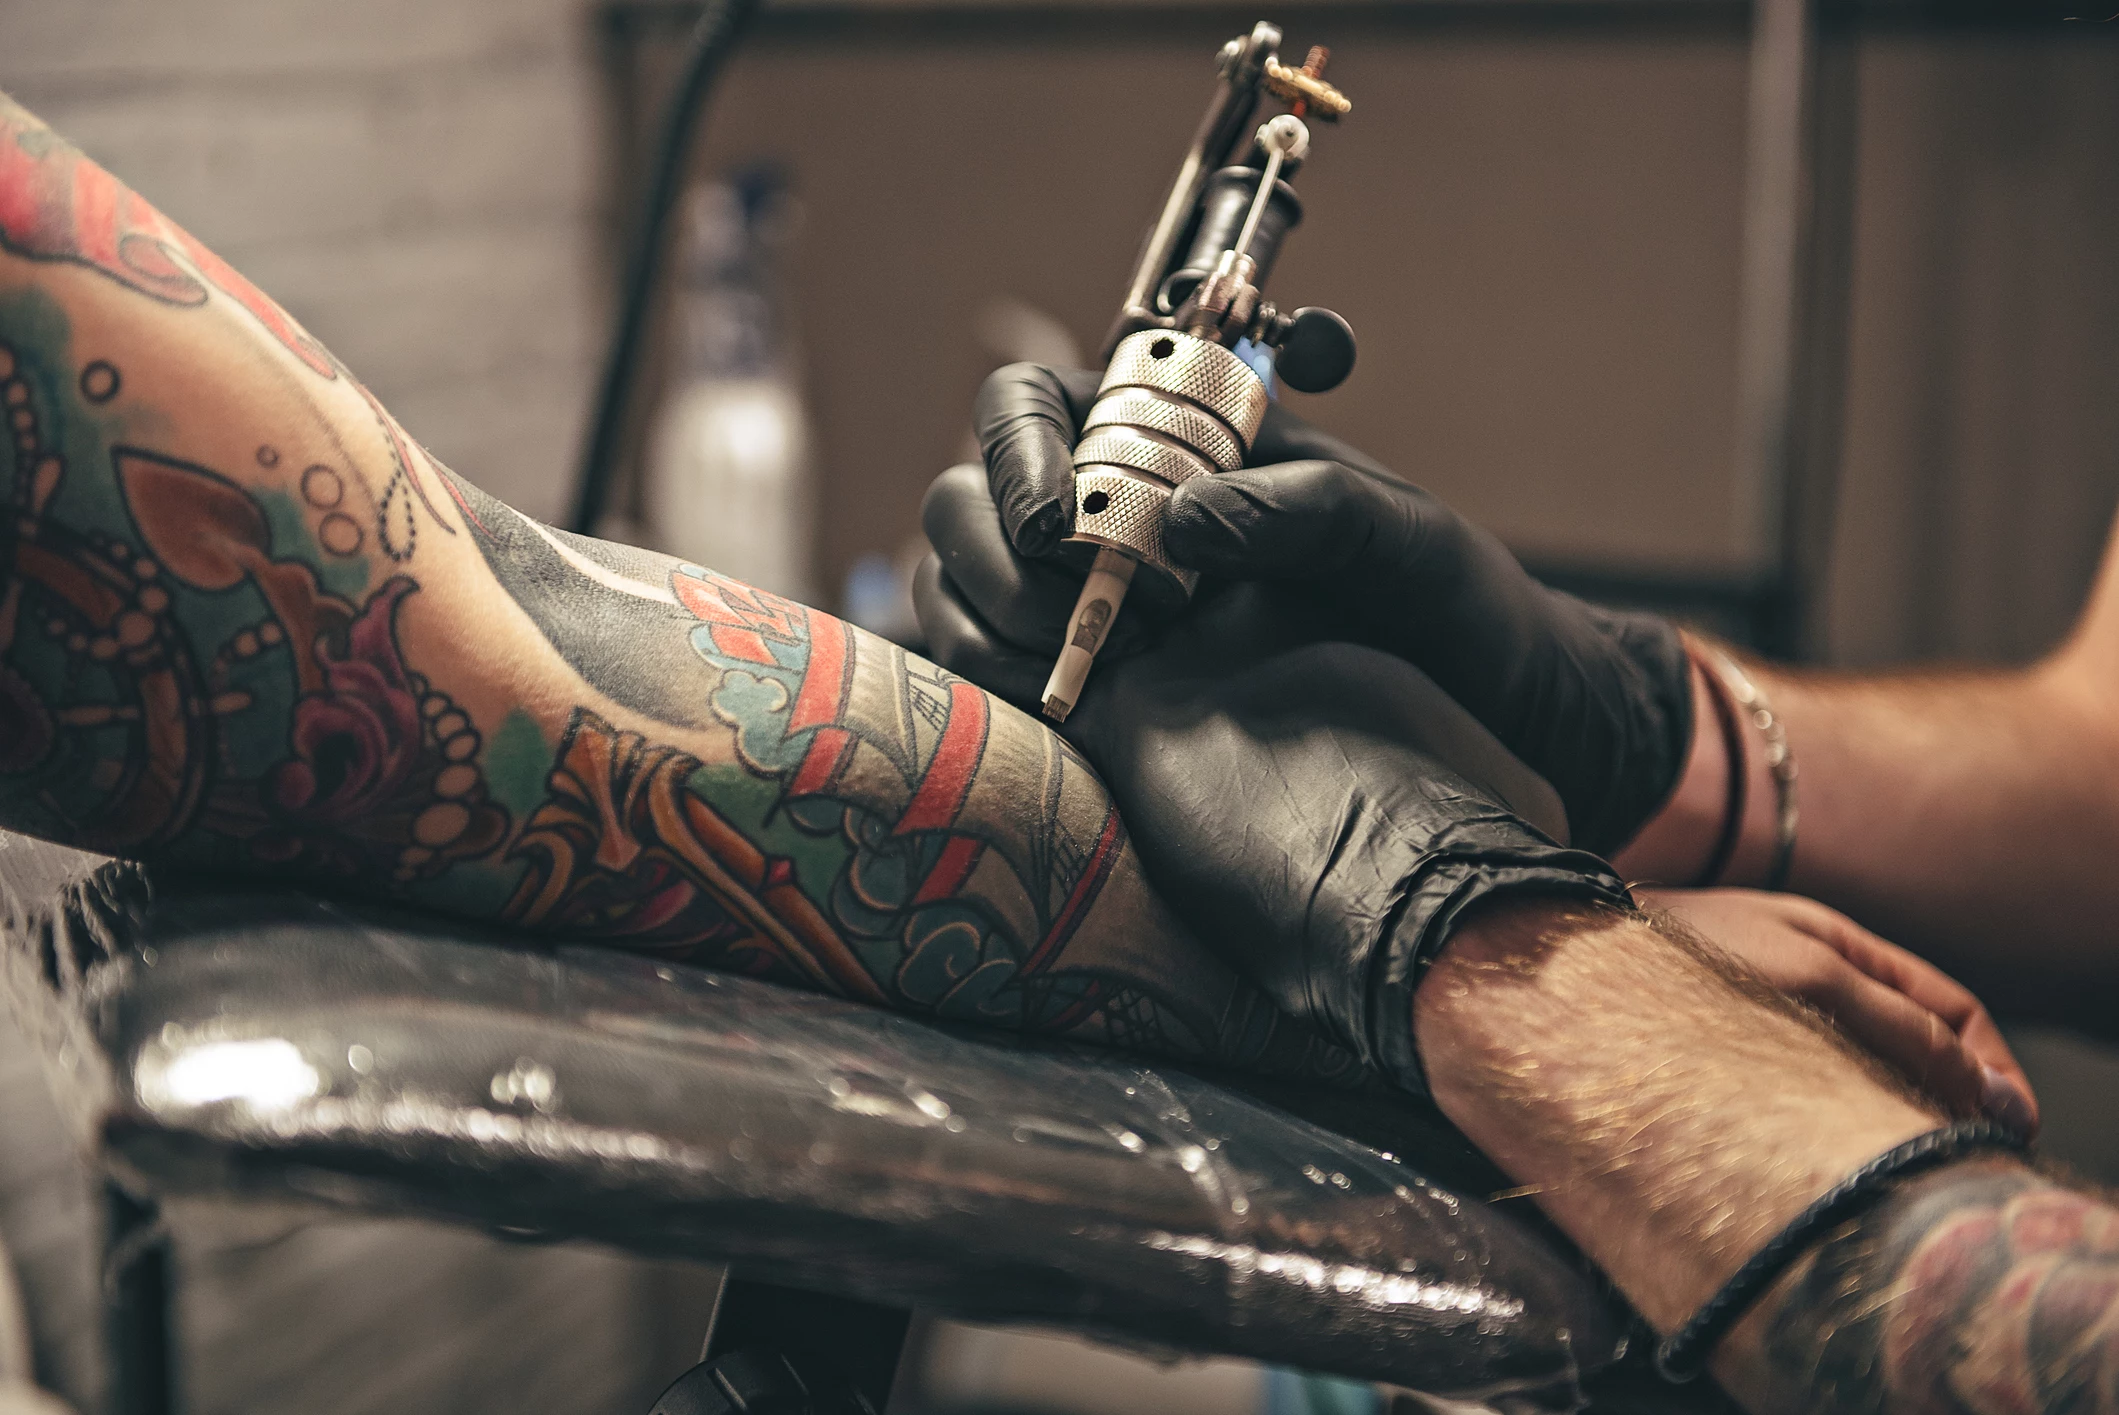 Tattoo Shops Near You in El Paso  Book a Tattoo Appointment in El Paso TX